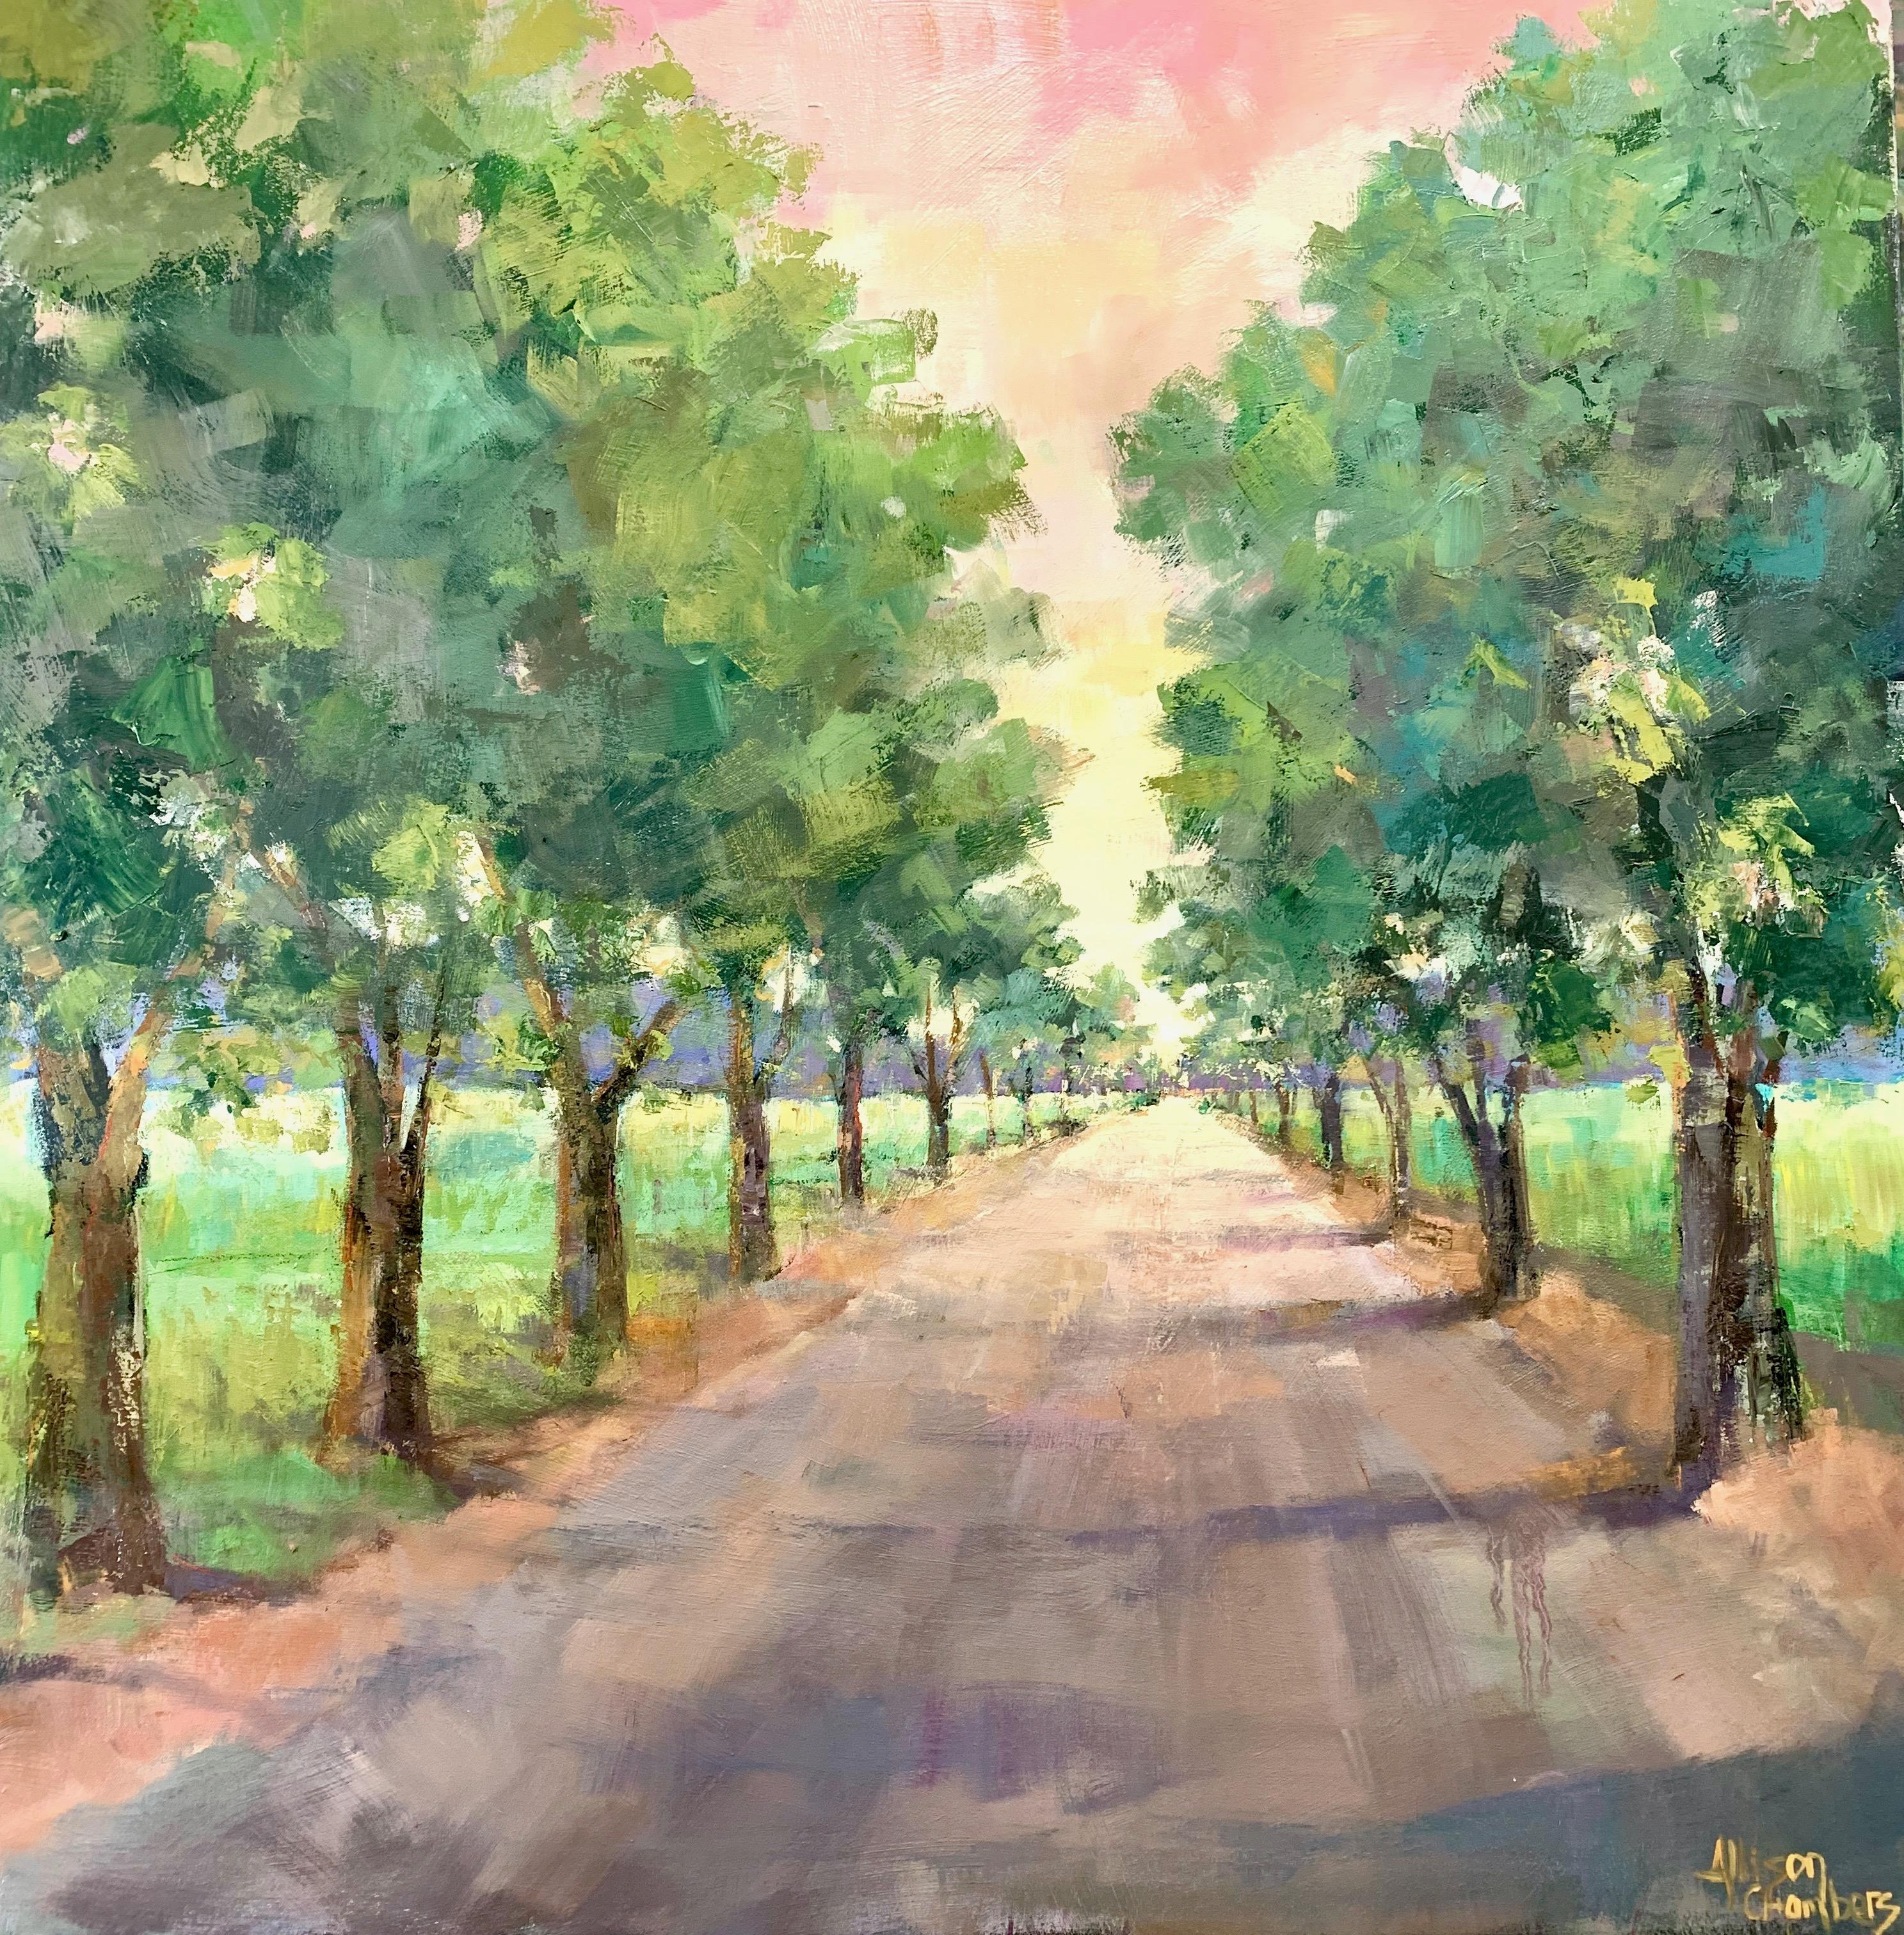 'Destination' is a large framed Impressionist oil on canvas landscape painting created by American artist Allison Chambers in 2019. Featuring a lovely palette mostly made of green, brown and pink tones, the painting depicts a small road flanked with